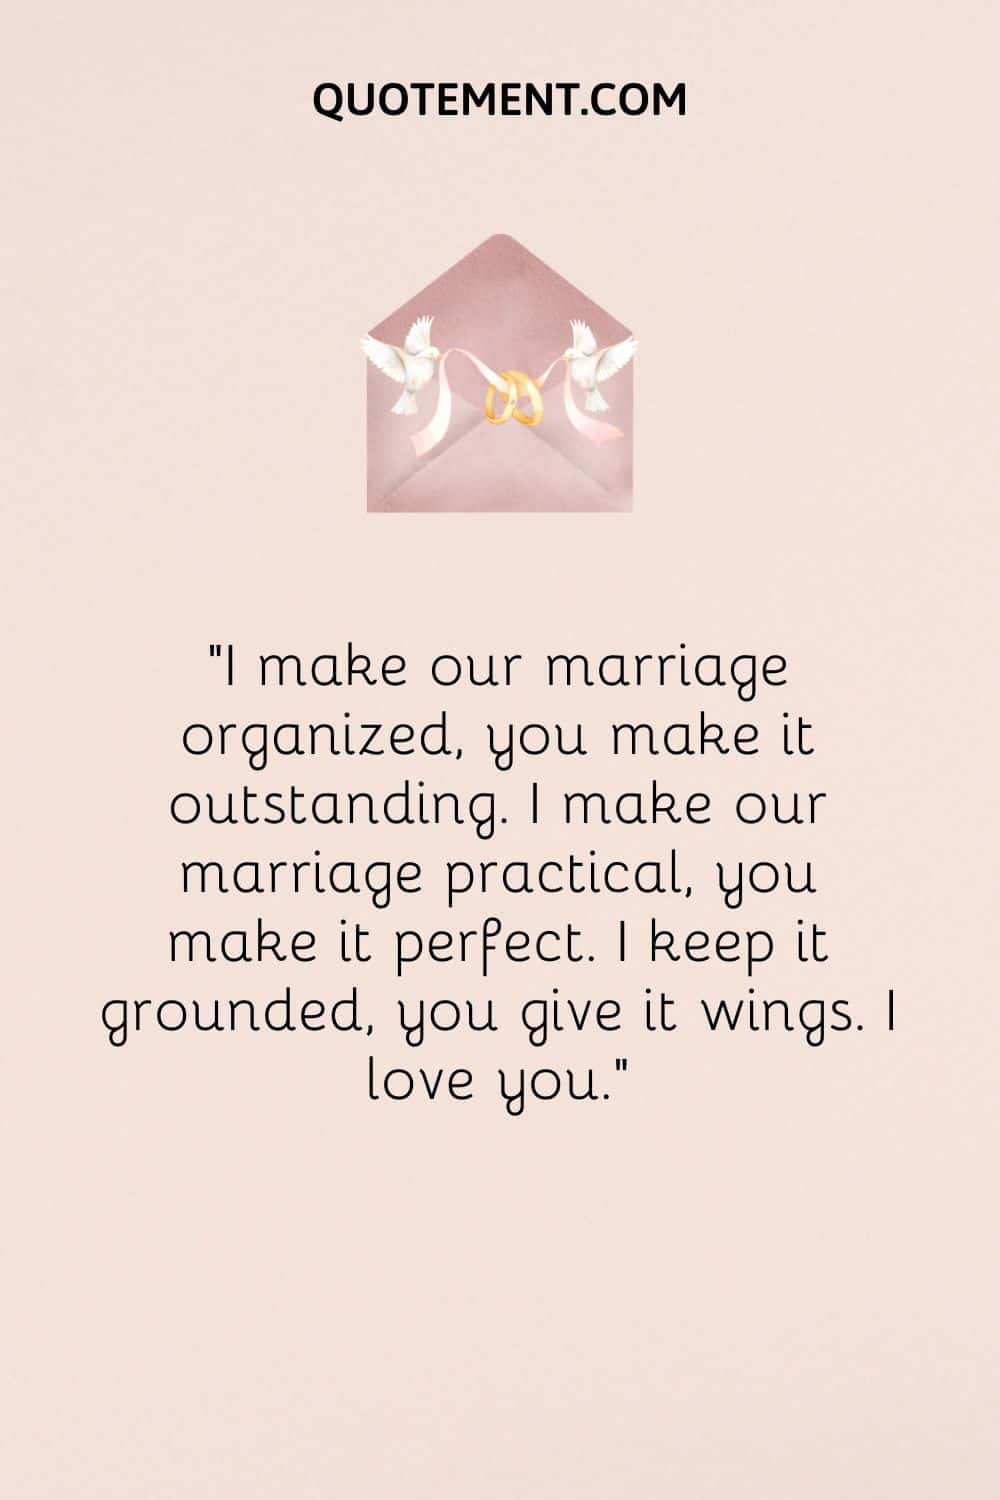 “I make our marriage organized, you make it outstanding. I make our marriage practical, you make it perfect. I keep it grounded, you give it wings. I love you.”